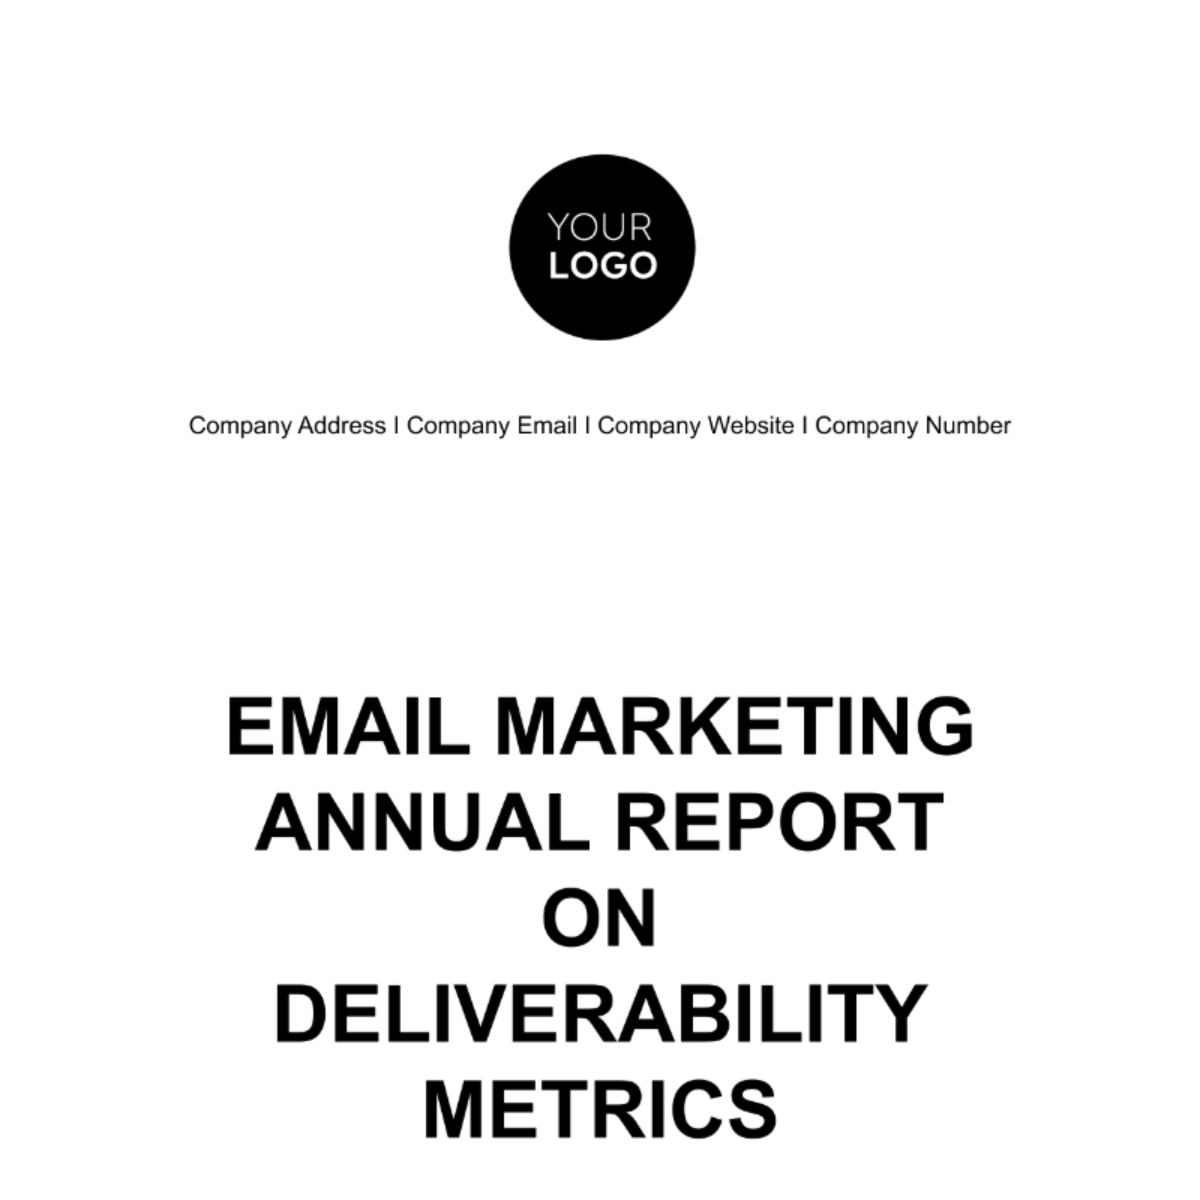 Free Email Marketing Annual Report on Deliverability Metrics Template